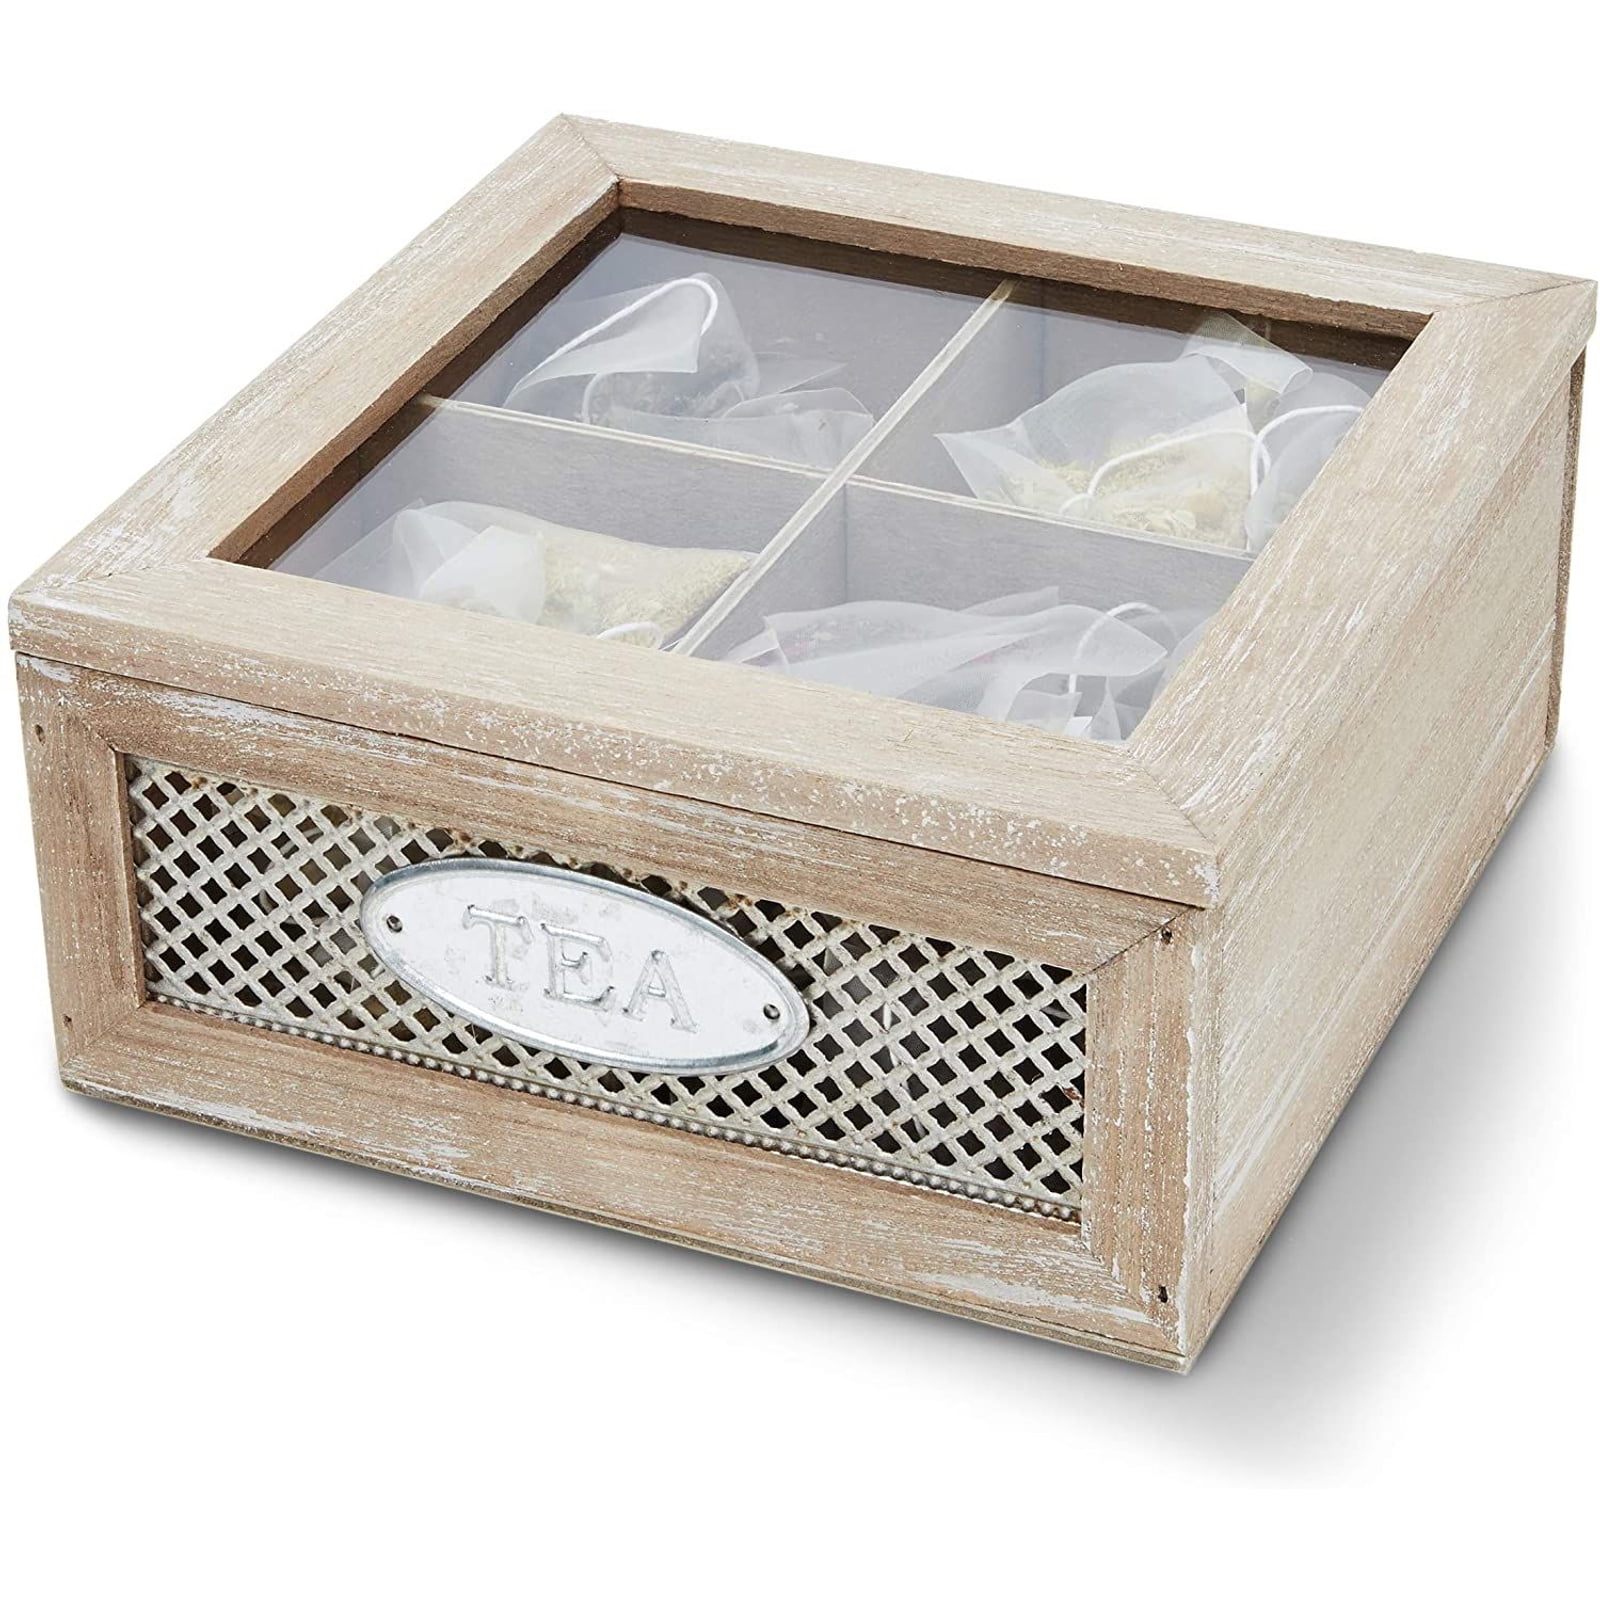 4 Compartments Tea Box Sachets Display Storage with Window Wooden Finish